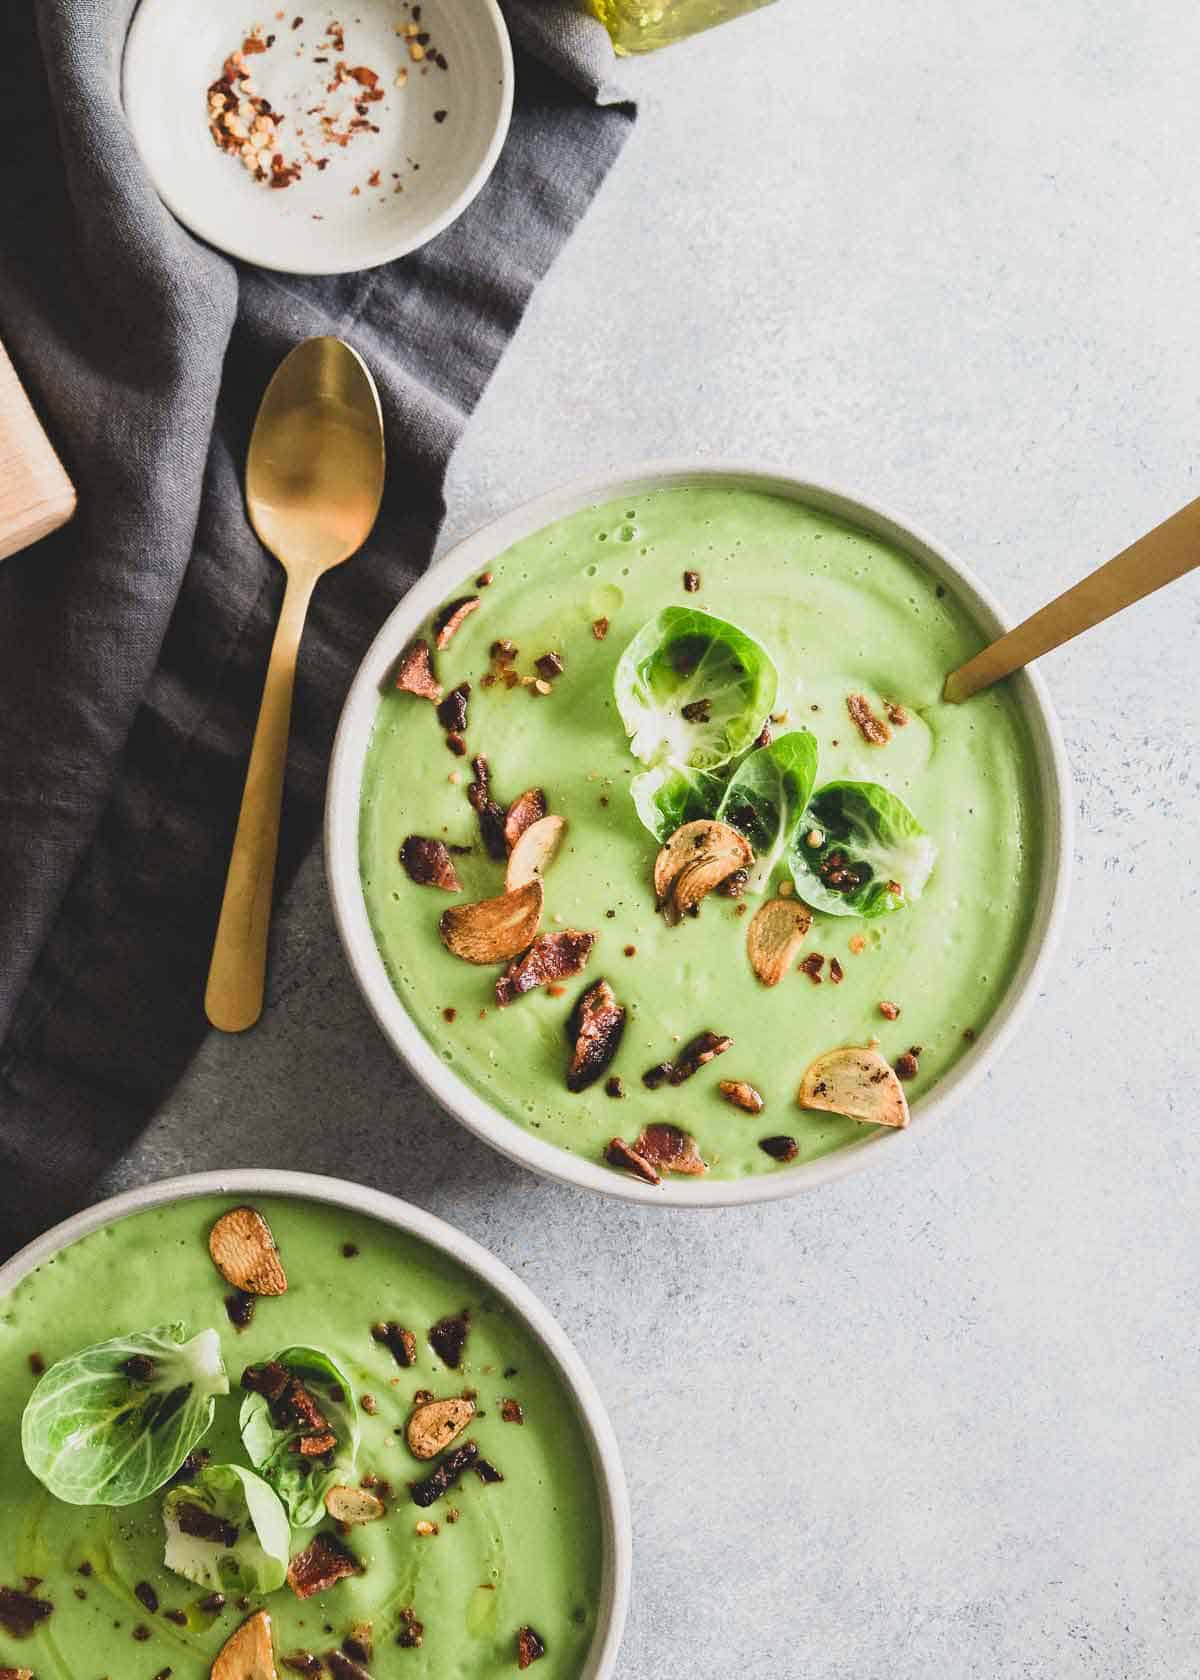 A dairy free, creamy and decadent Brussels sprout soup made in your high powered blender.